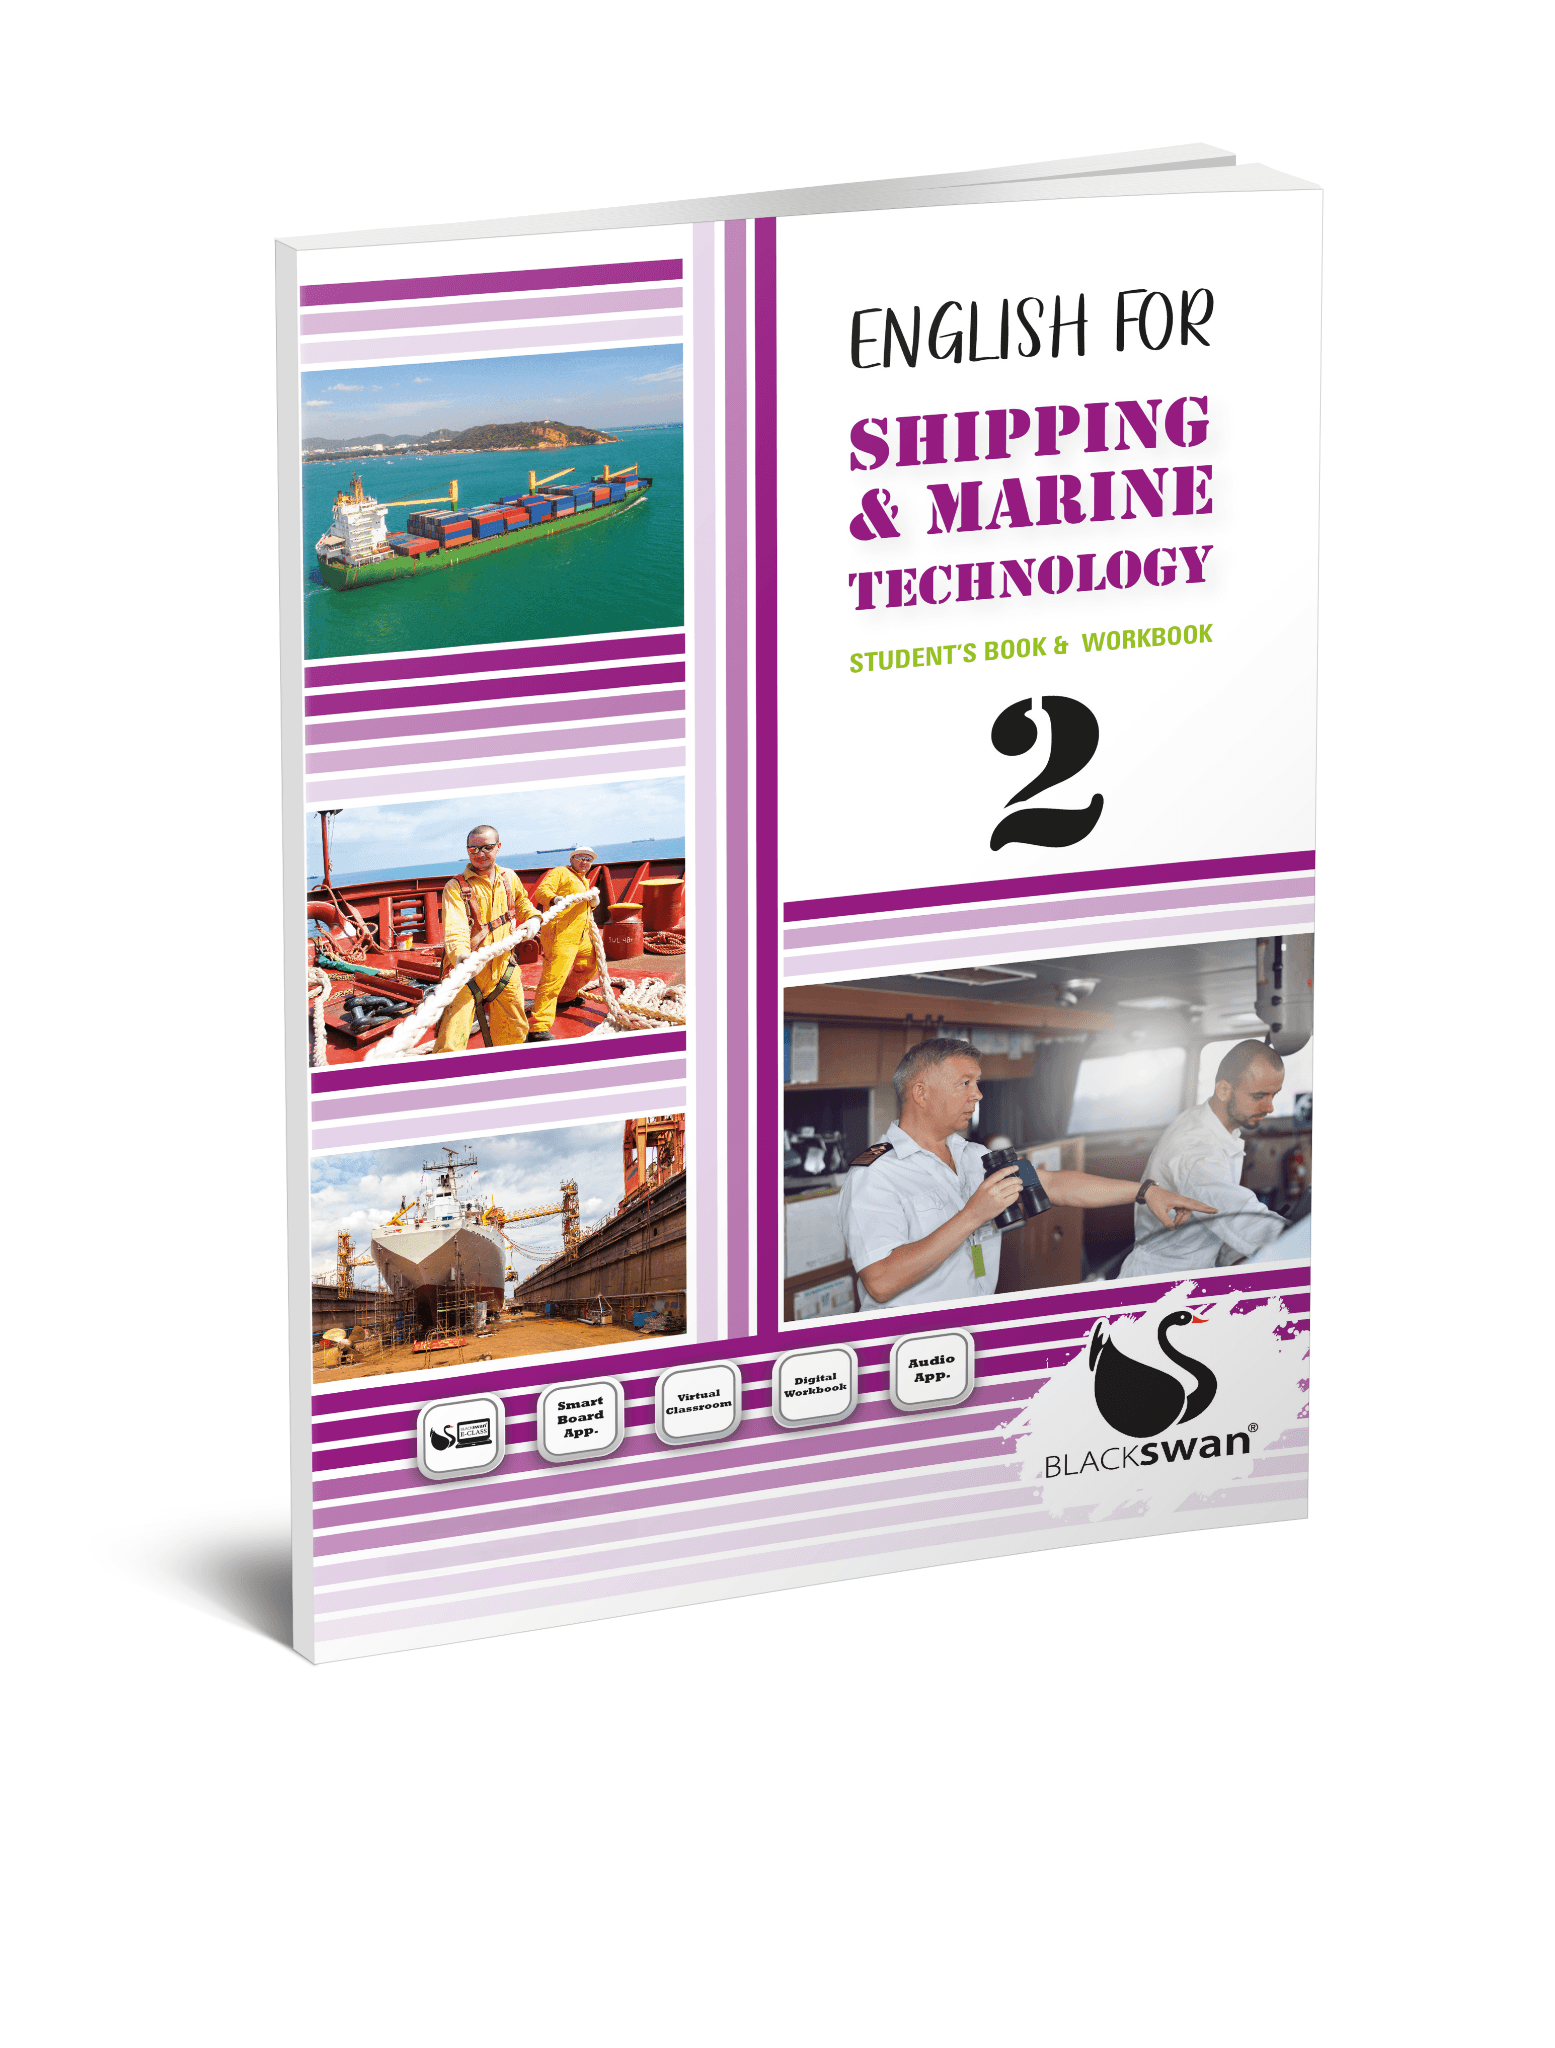 English for Shipping and Marine Technology 2 Student's Book & Workbook